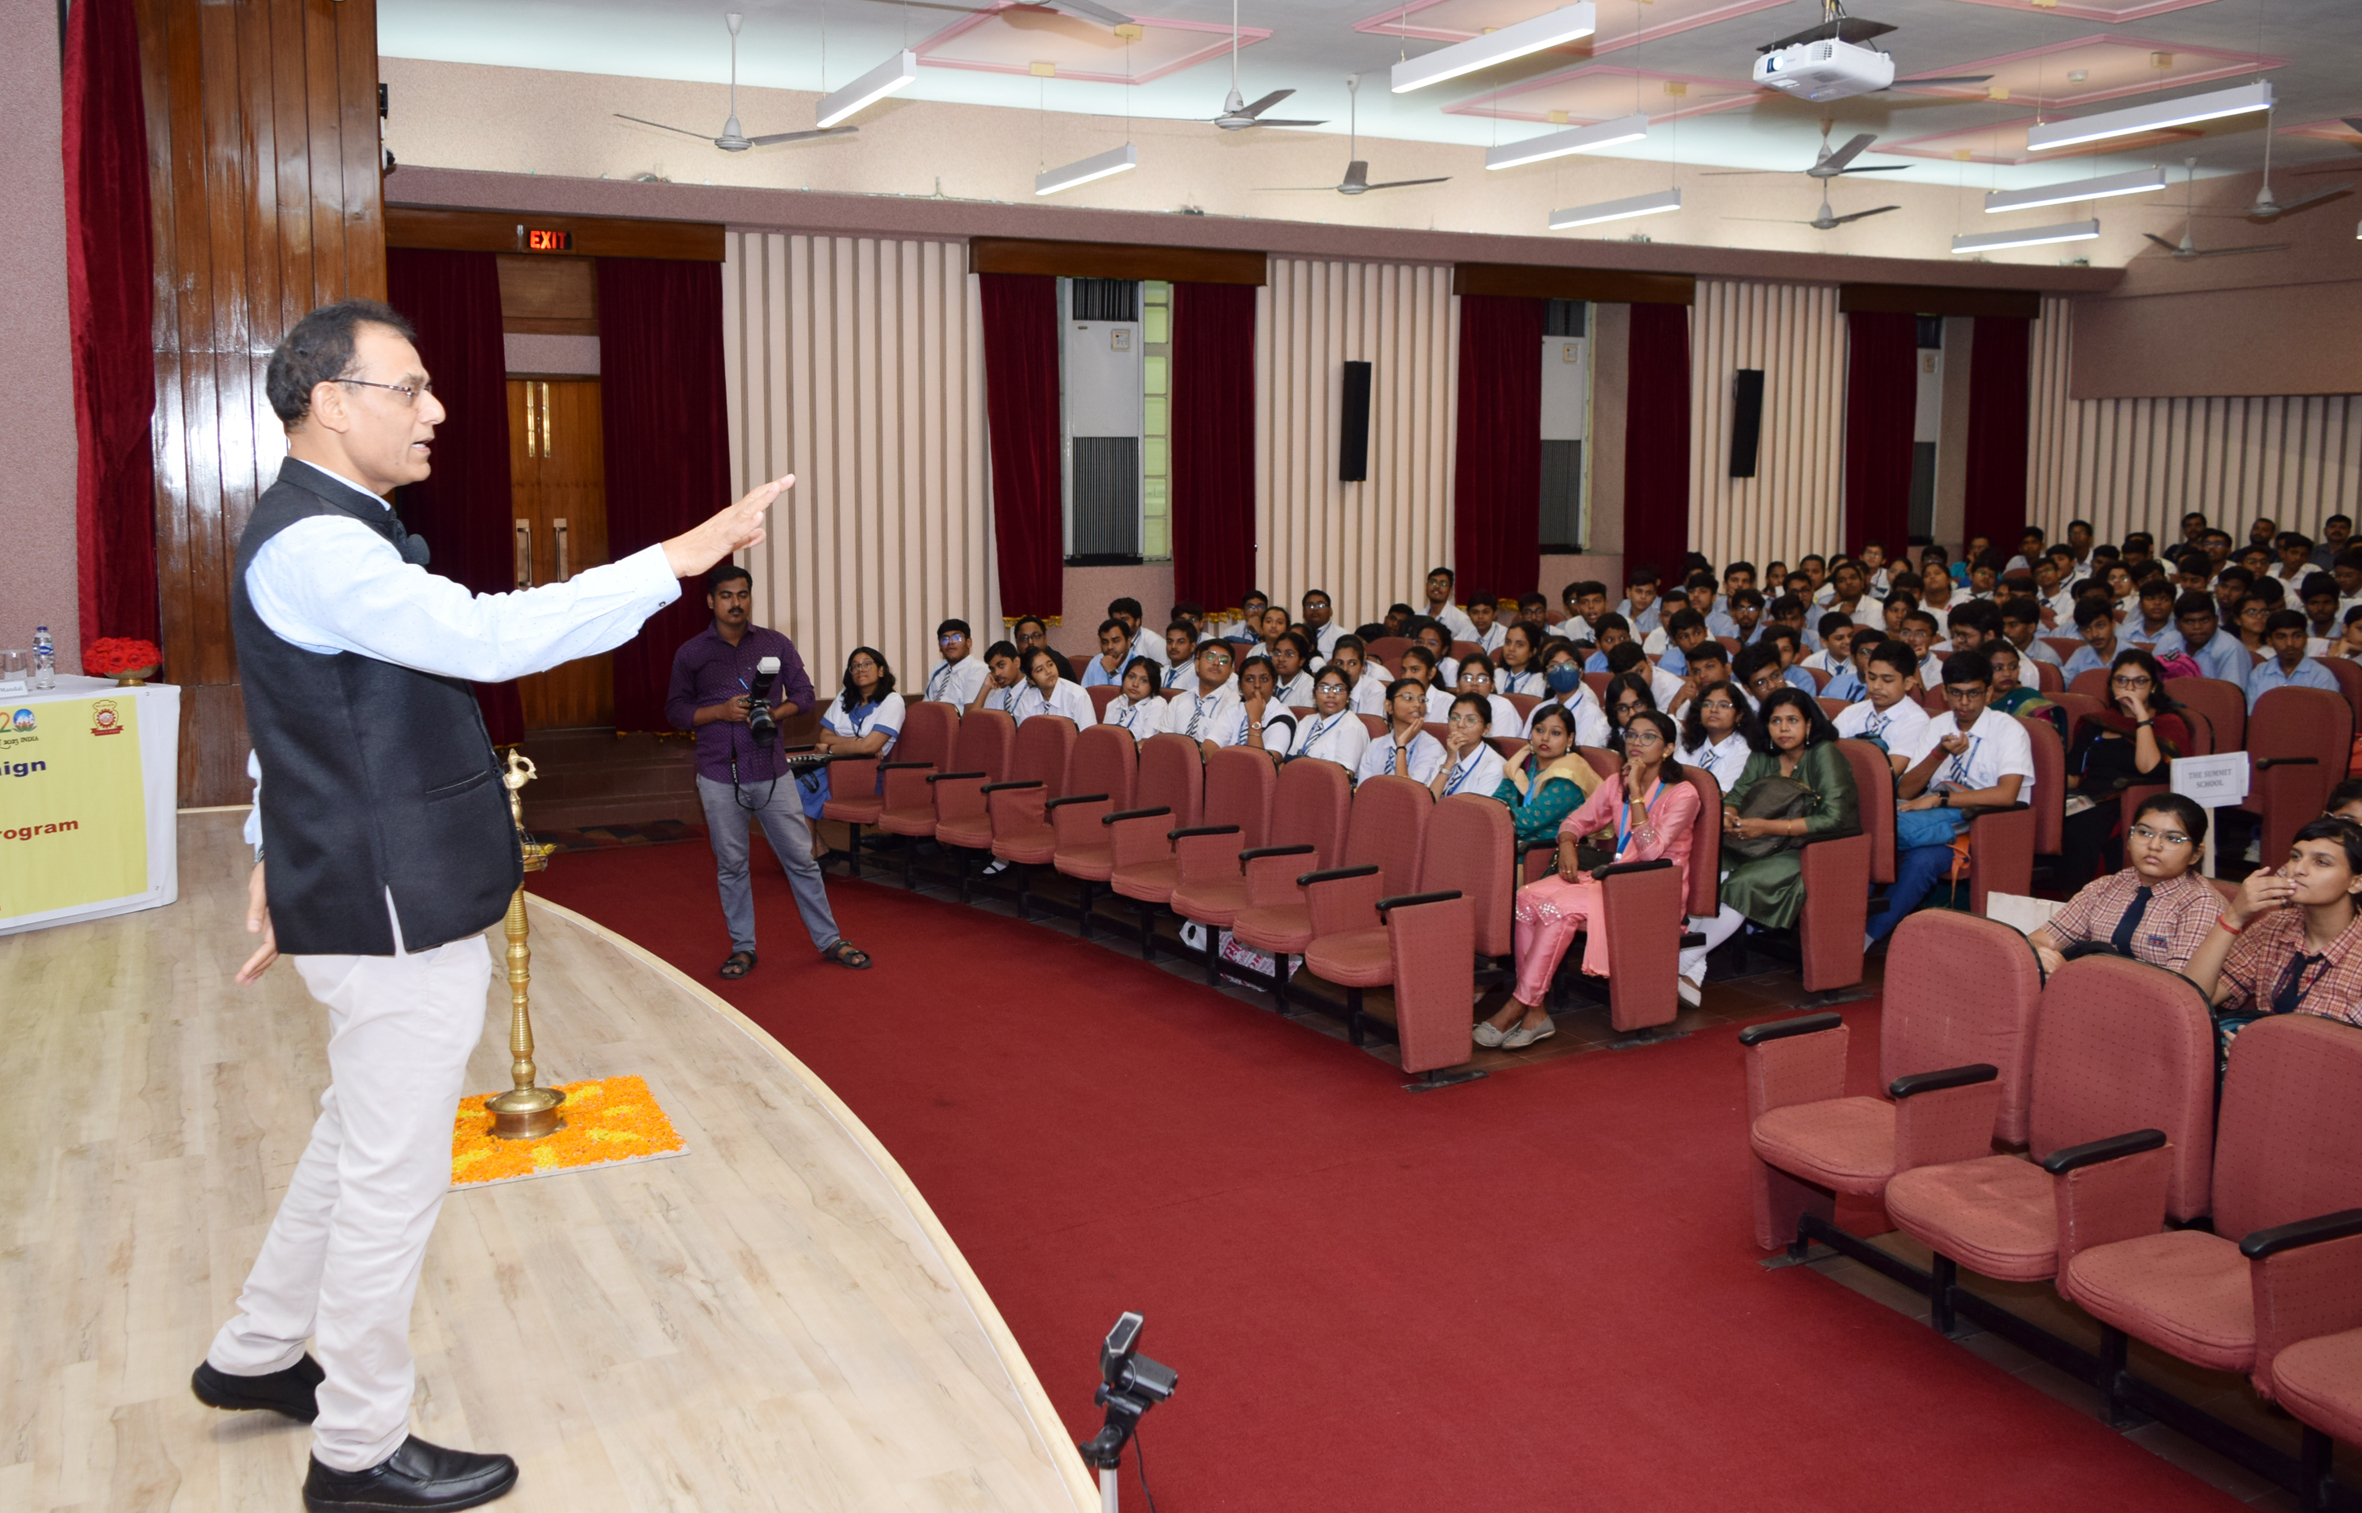 Popular Lecture by Dr. Arun Bandyopadhyay, Director, CSIR-Indian Institute of Chemical Biology, Kolkata